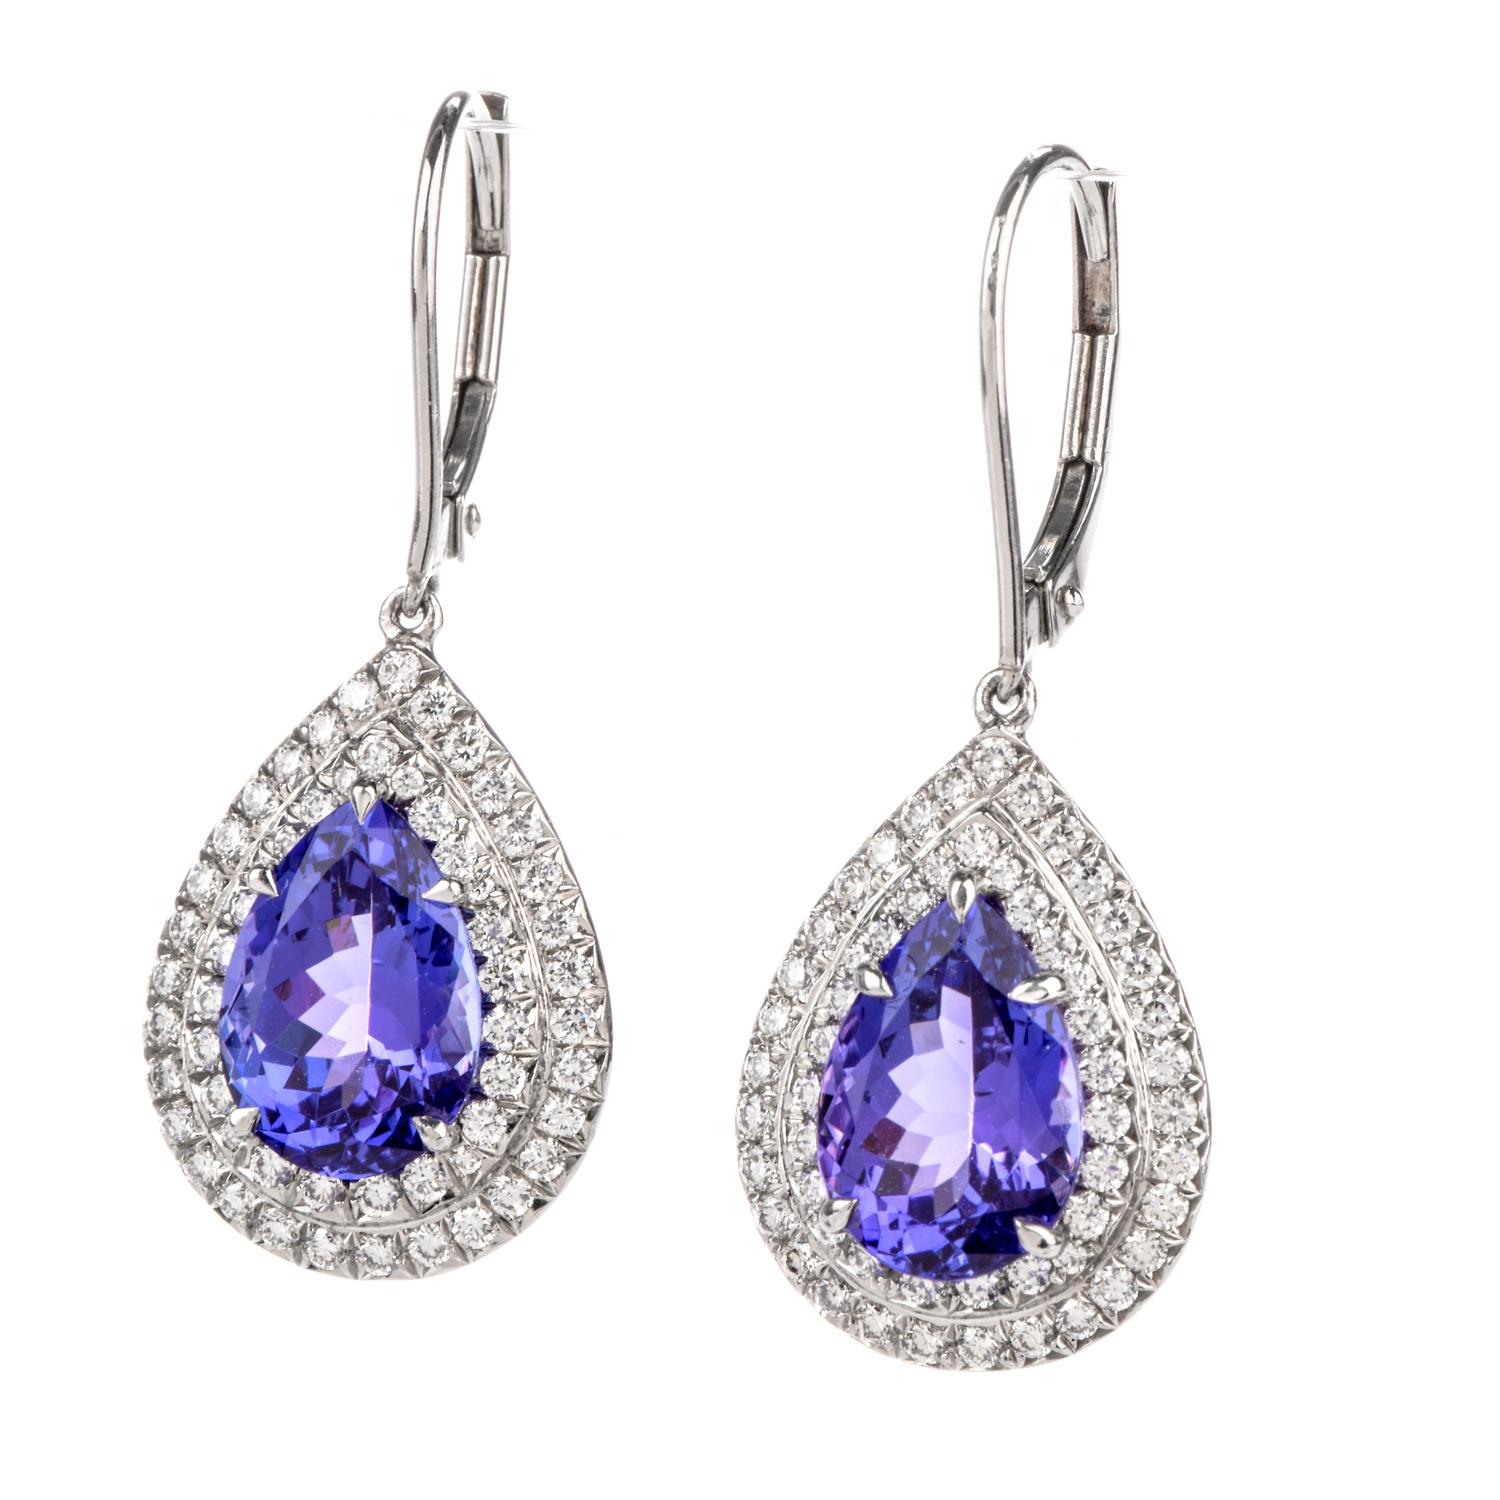 These Tiffany Diamond and Tanzanite  Earrings from Soleste collection  were inspired with a drop style dangle design and 

crafted in Platinum.

The Stunning pear shaped Tanzanite are surrounded by a double

halo in white diamonds.

Diamonds weigh